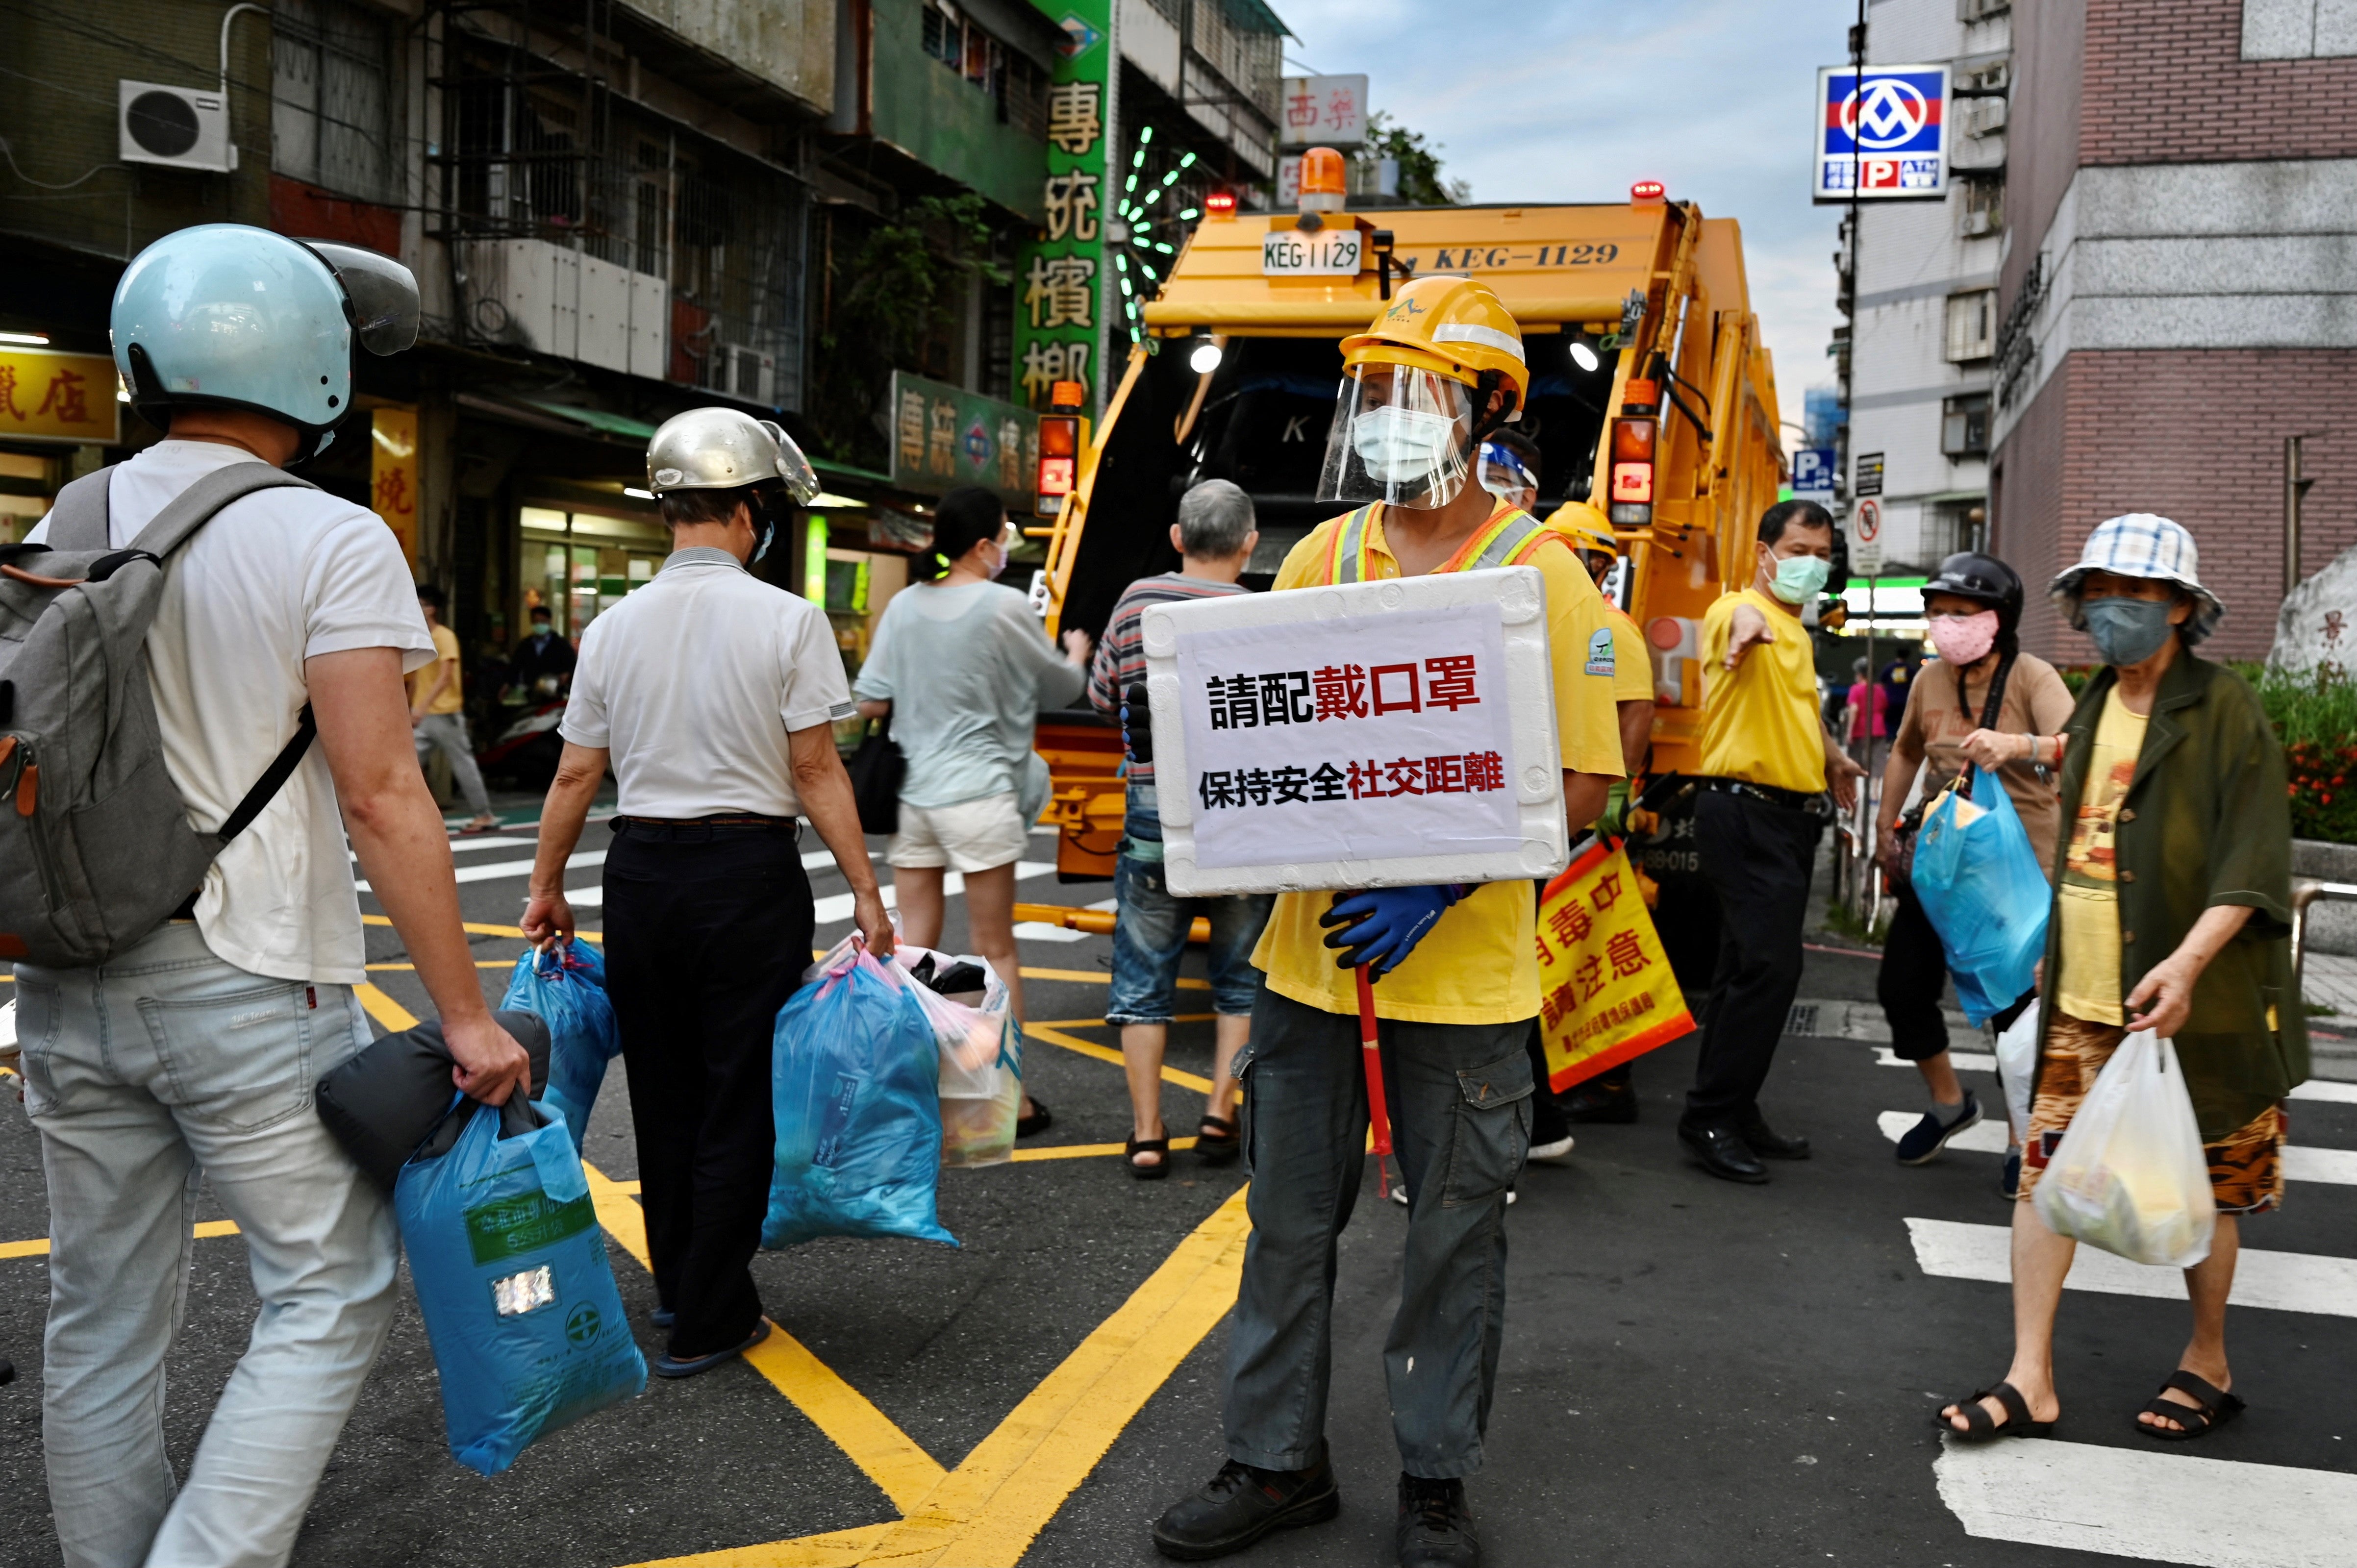 Local residents line up to dump their rubbish into a refuse truck in Taipei